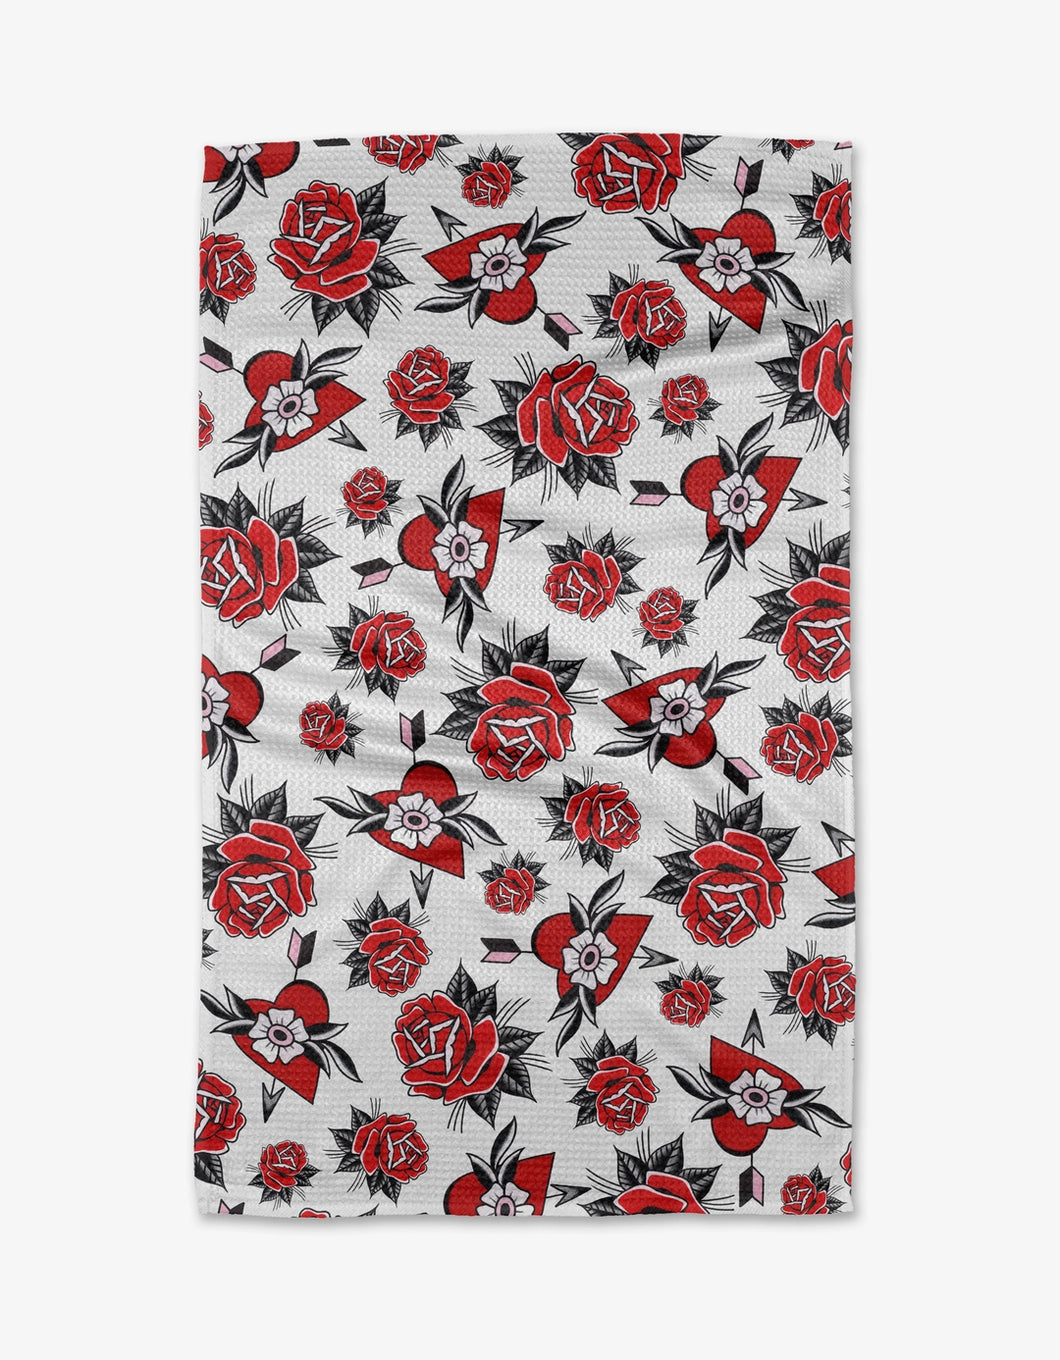 Geometry Kitchen Tea Towel: Hearts and Roses